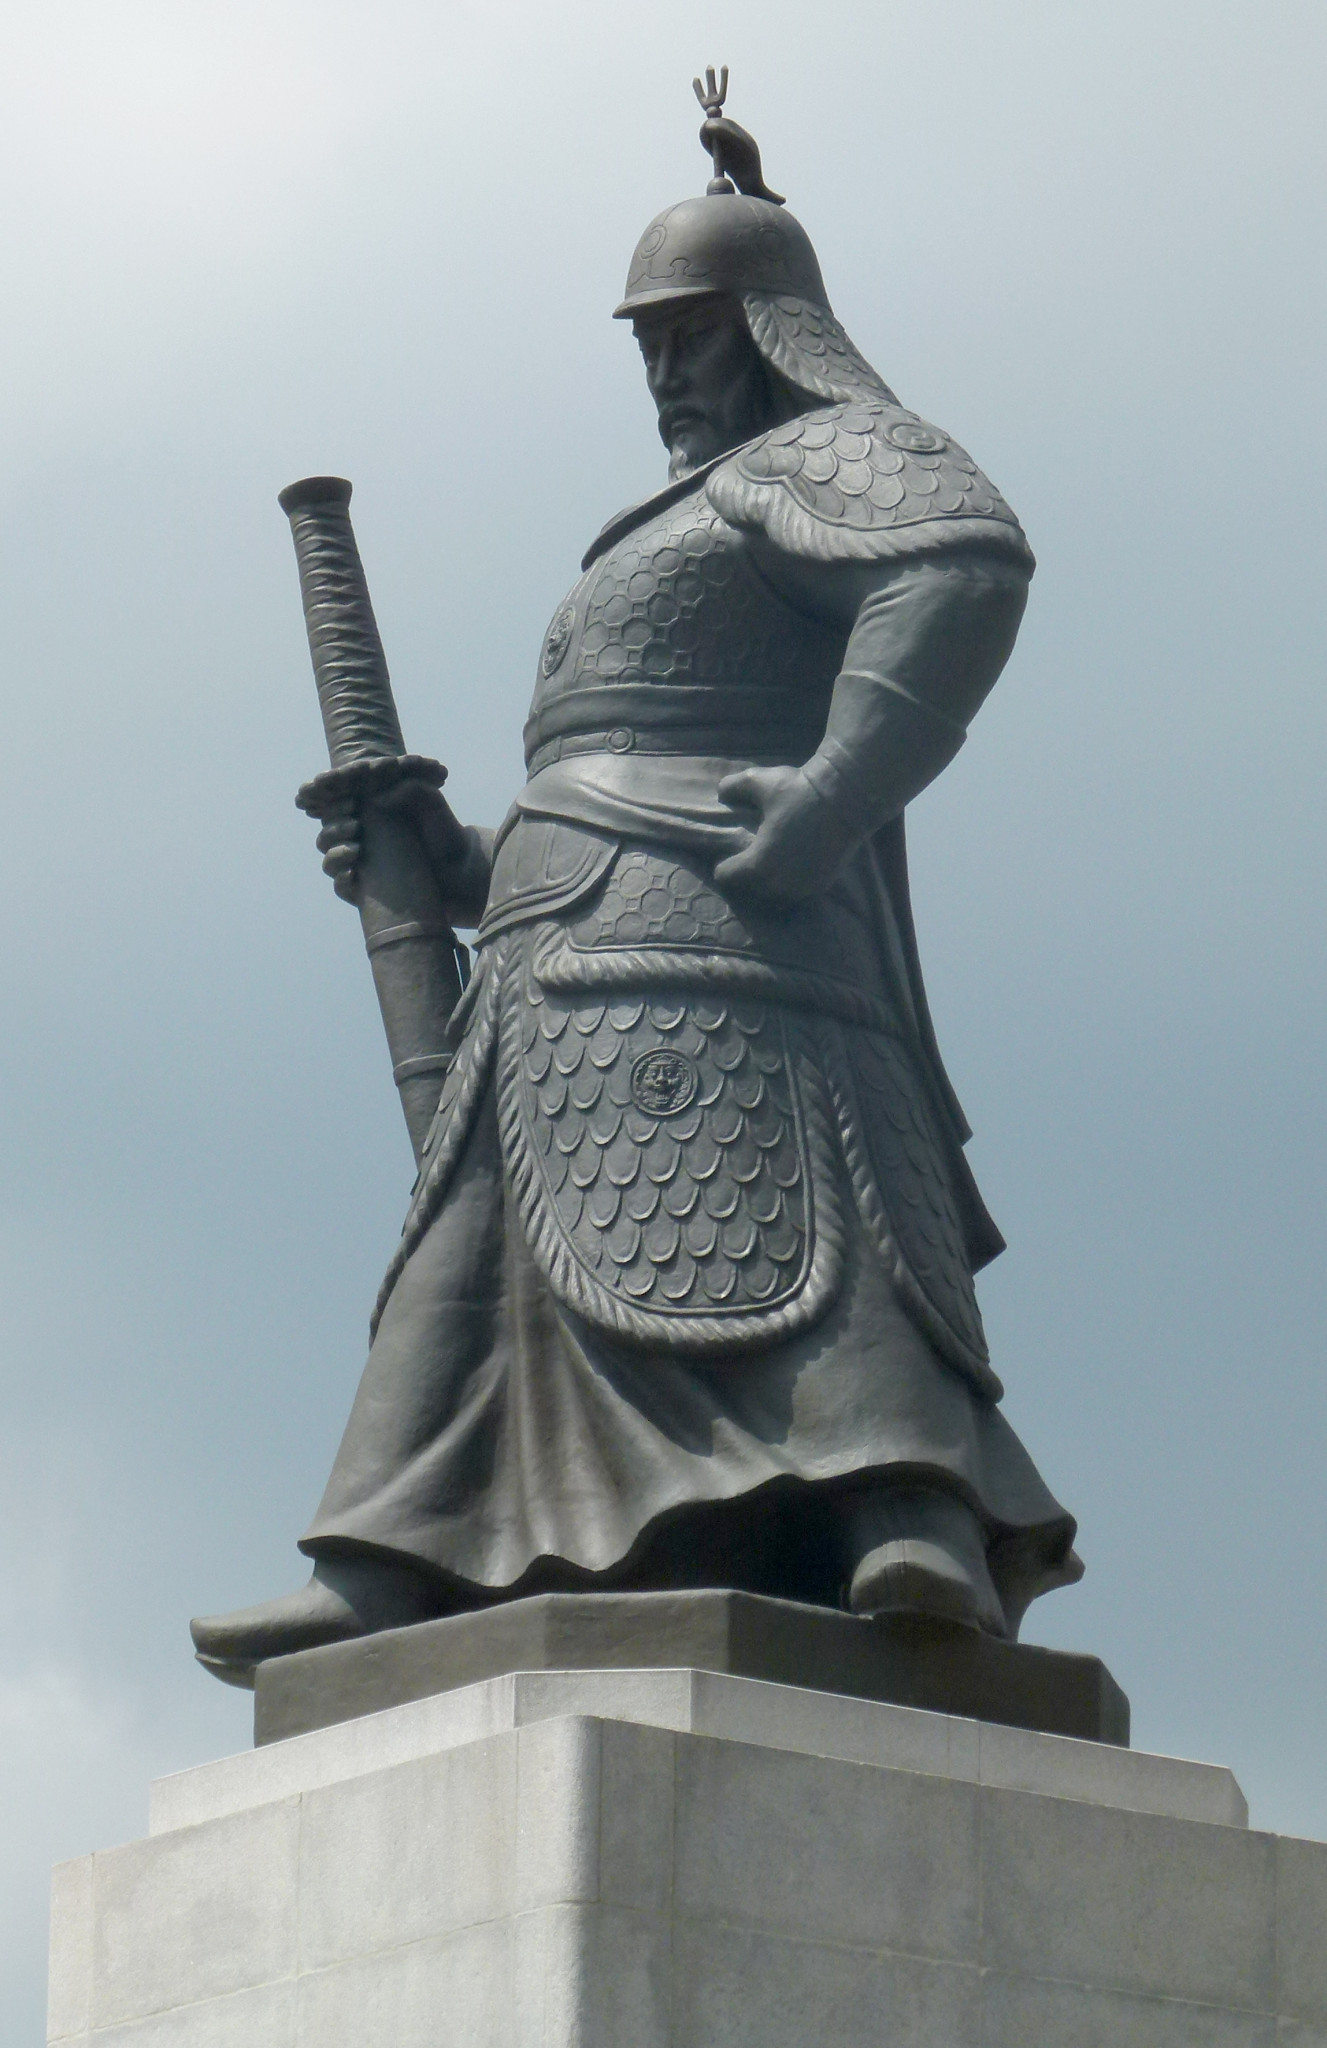 South Korean goaltender Matt Dalton claimed he was inspired to put an image of Admiral Yi Sun-shin, who defeated Japan in a famous battle in 1597, on his mask after visiting his statue in Seoul ©Wikipedia